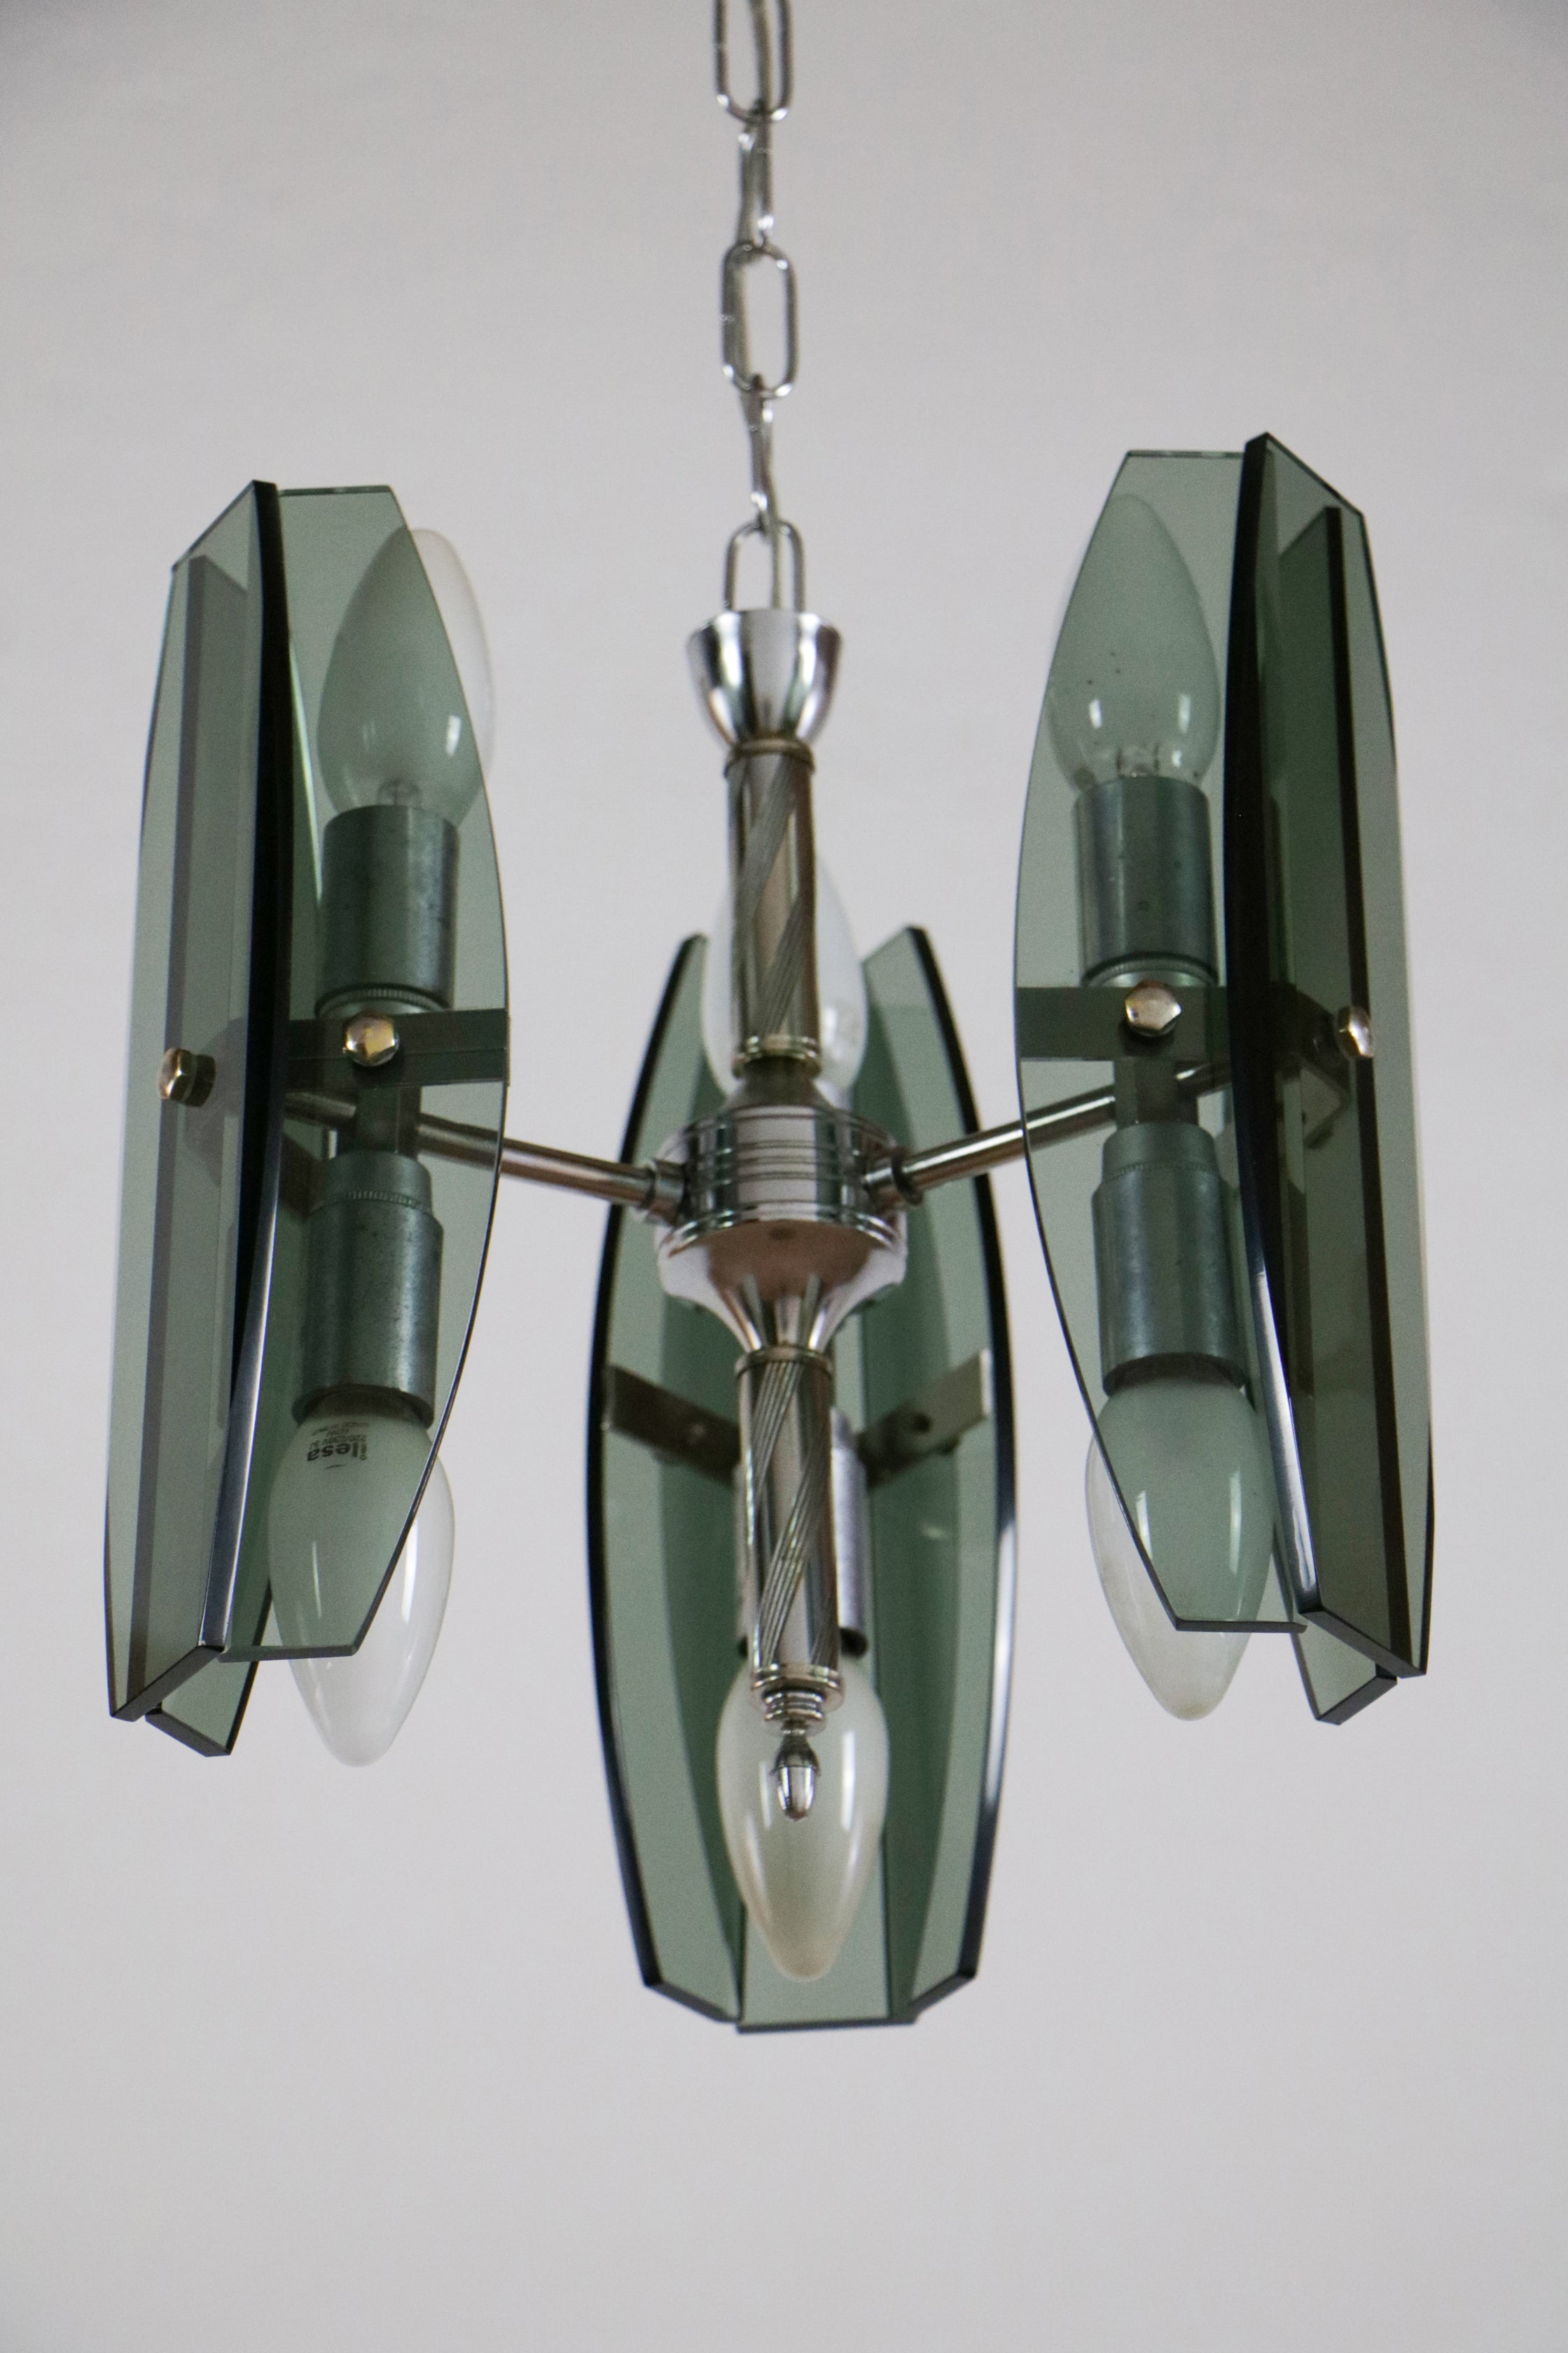 A stylish Italian midcentury pendant lamp or chandelier from the 1970s, in the Veca style by Fontana Arte. The pendant lamp or chandelier is made of chromed brass and steel, surrounded by crystal panels in green bottle color. The electrical system